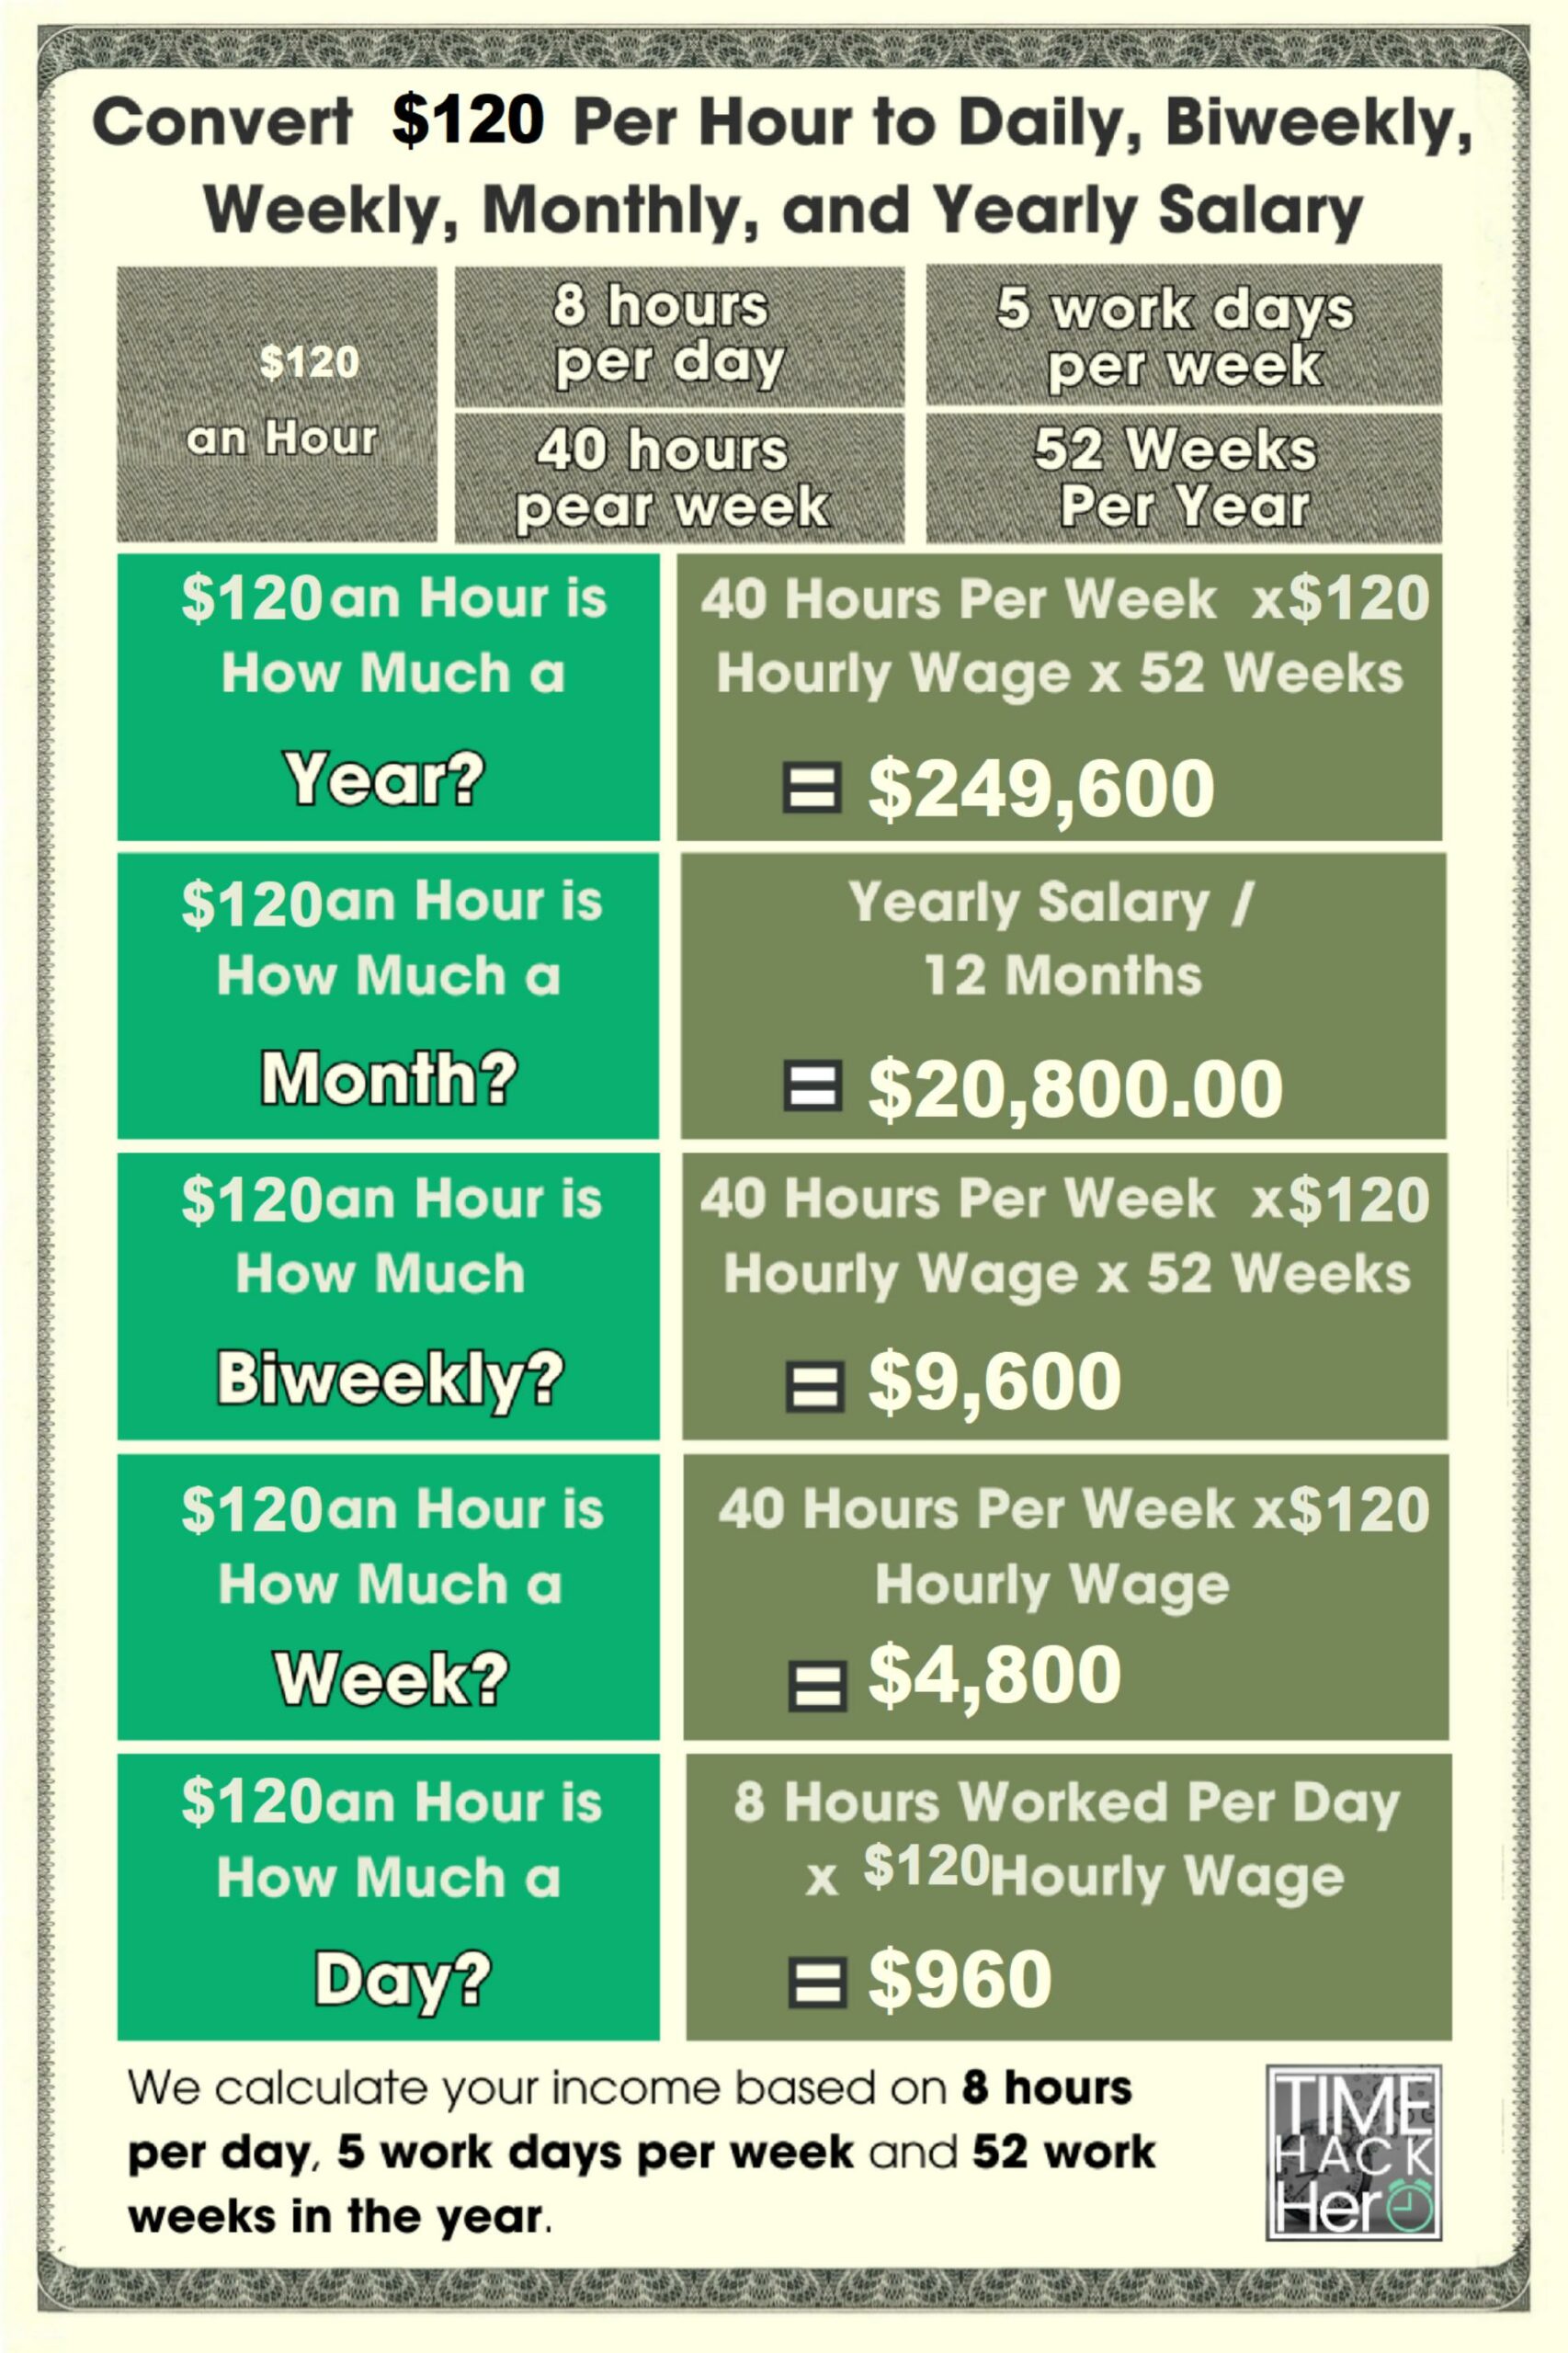 Convert $120 Per Hour to Weekly, Monthly, and Yearly Salary